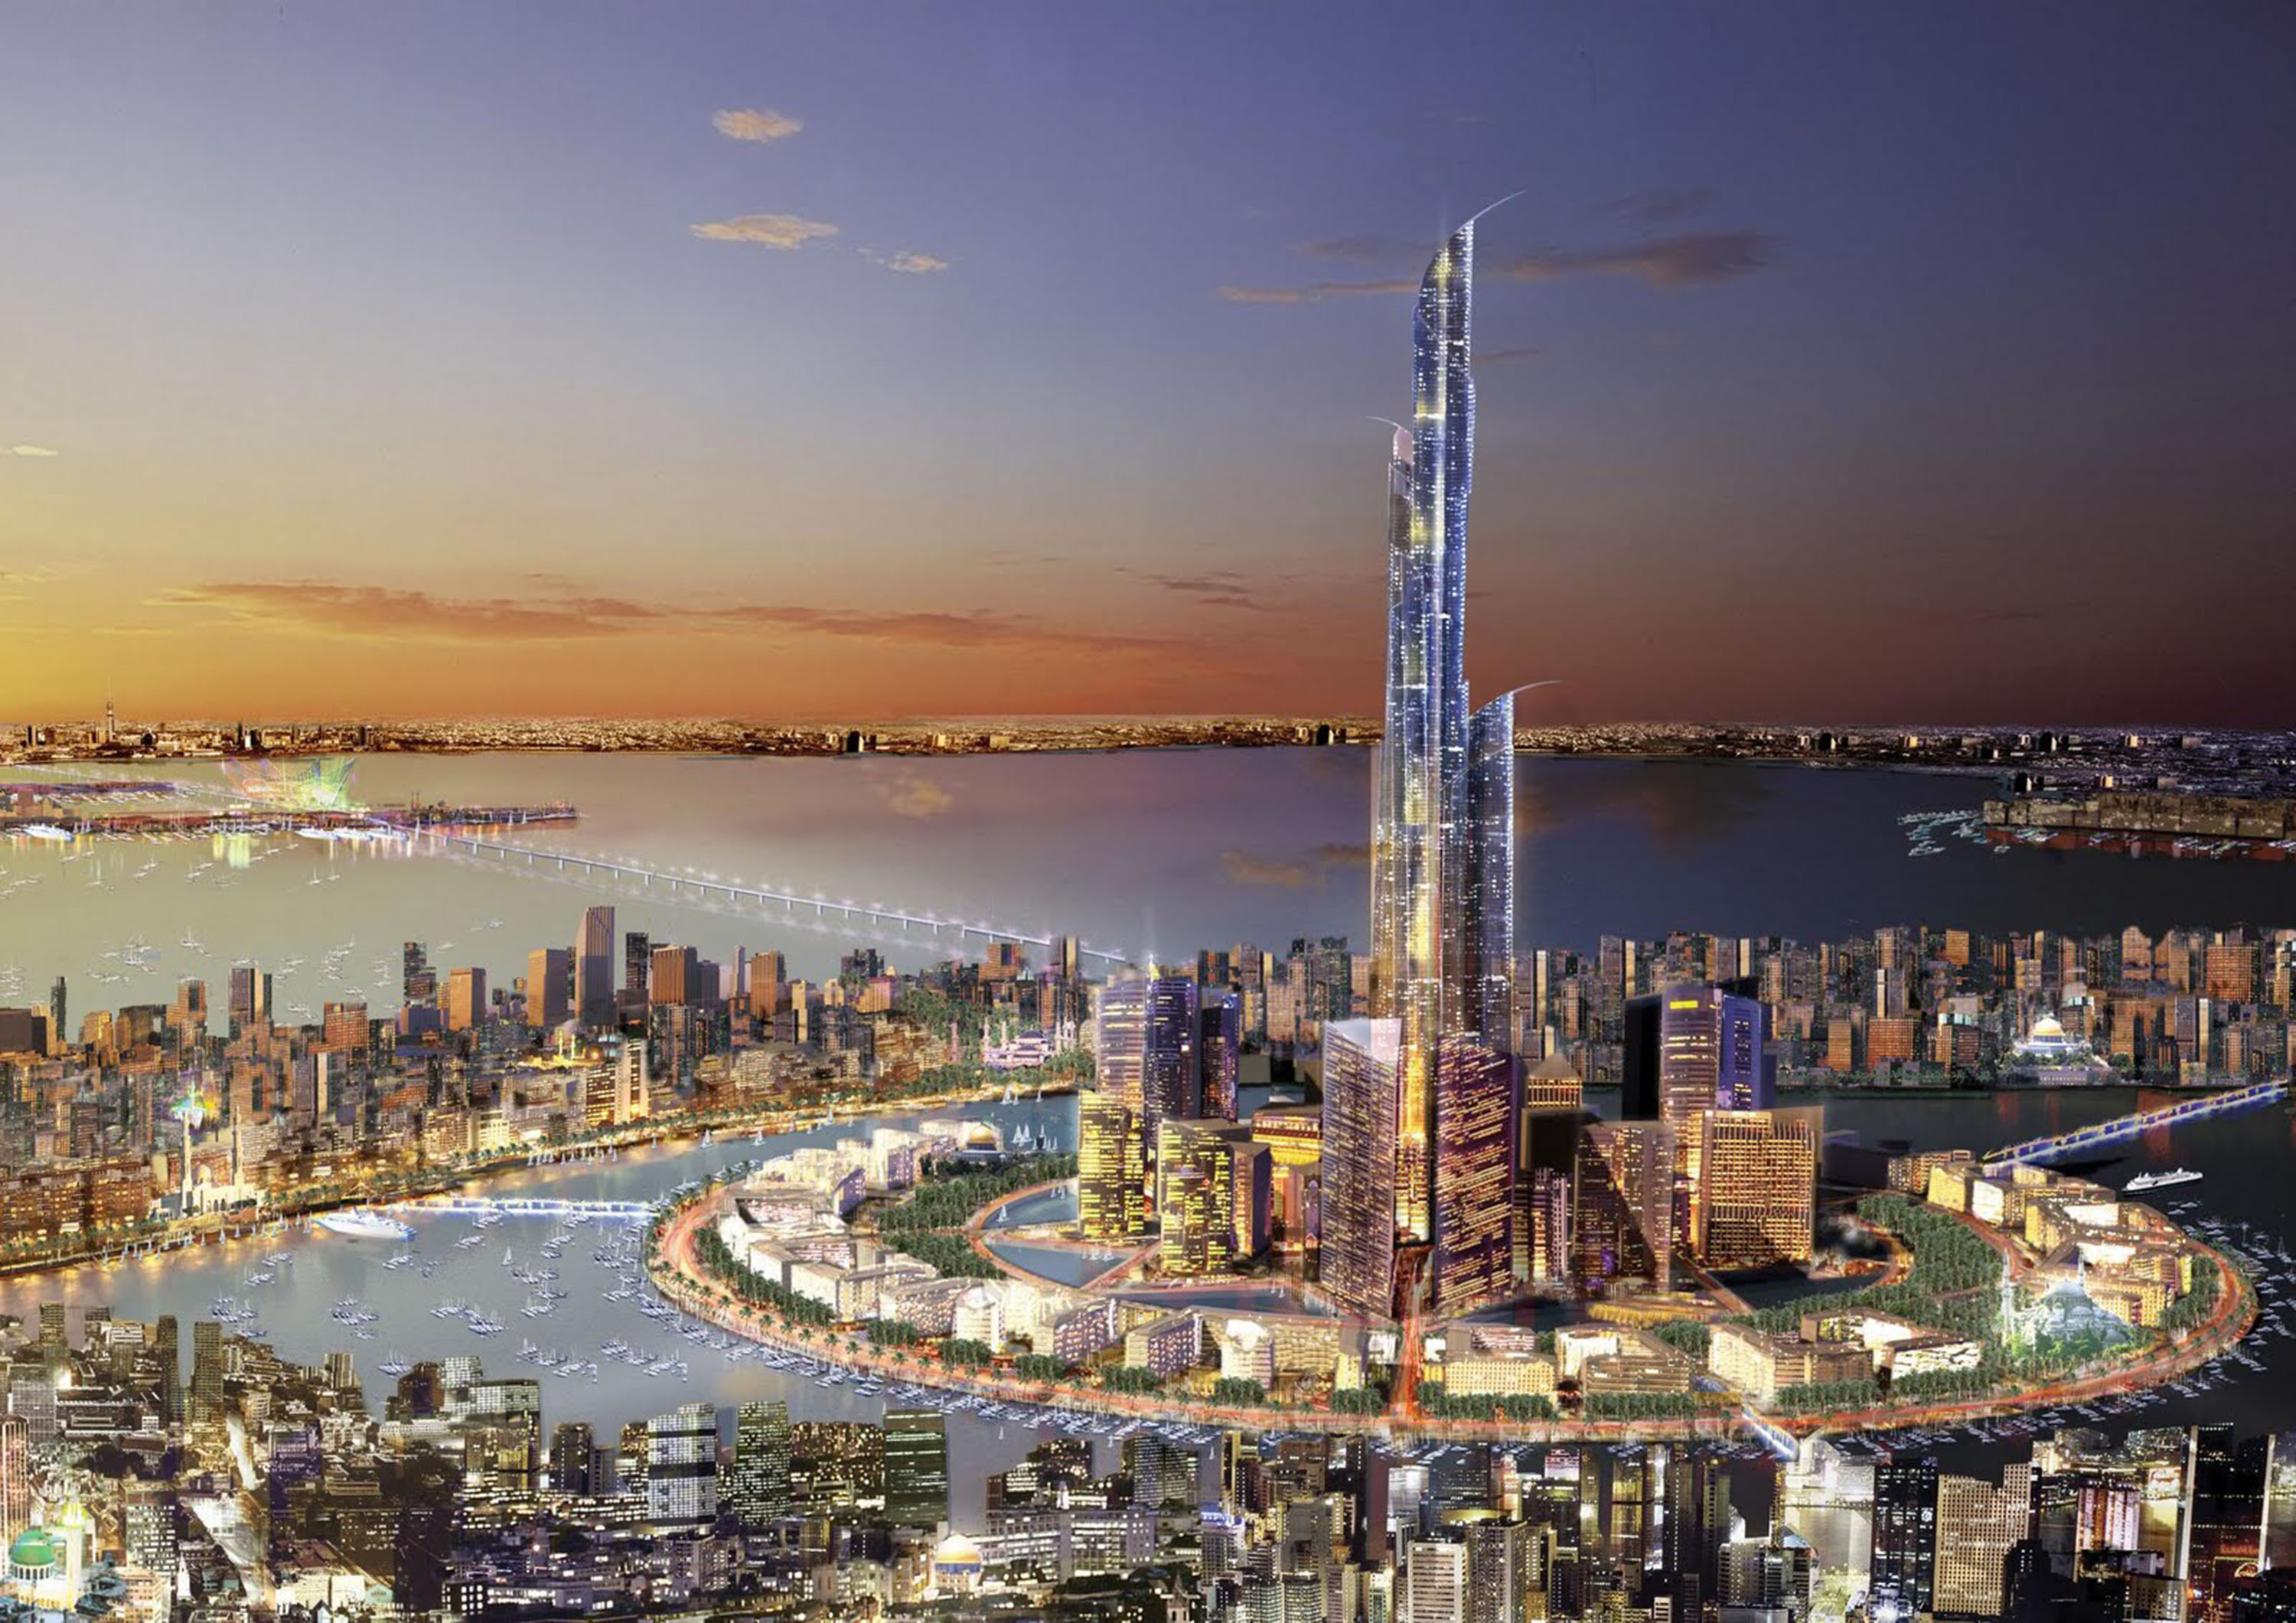 The Silk City Project puts Kuwait on global investment map